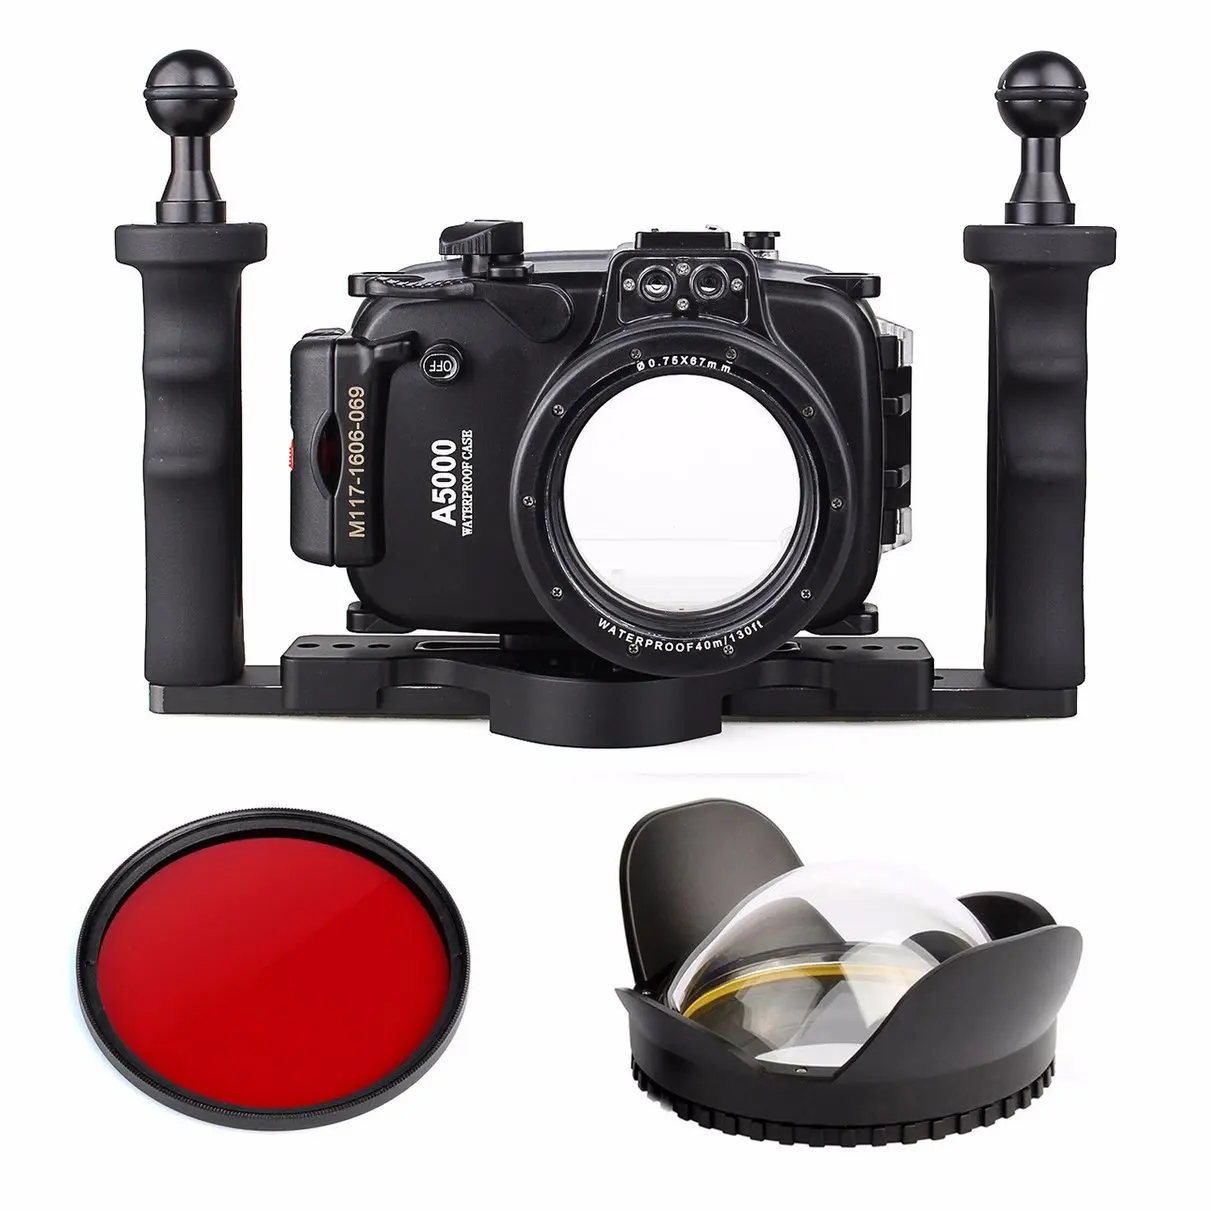 

40m Waterproof Underwater Diving Camera Case For Sony A5000 16-50mm + Two Hands Aluminium Tray + 67mm Fisheye Lens + Red Filter